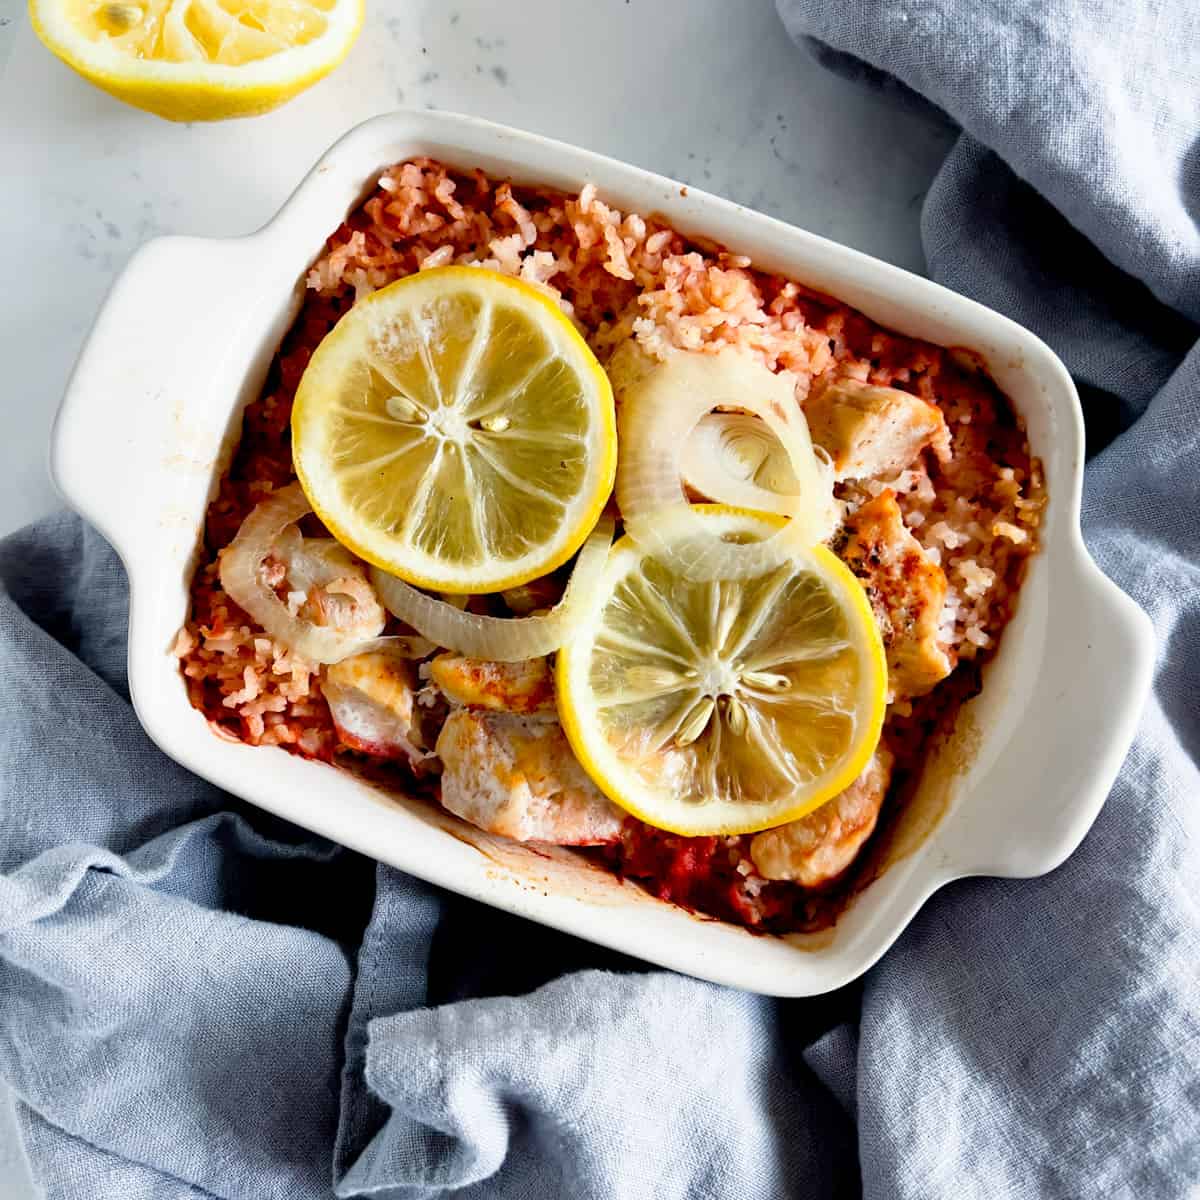 Lemon chicken casserole topped with lemon slices in a small white casserole dish.